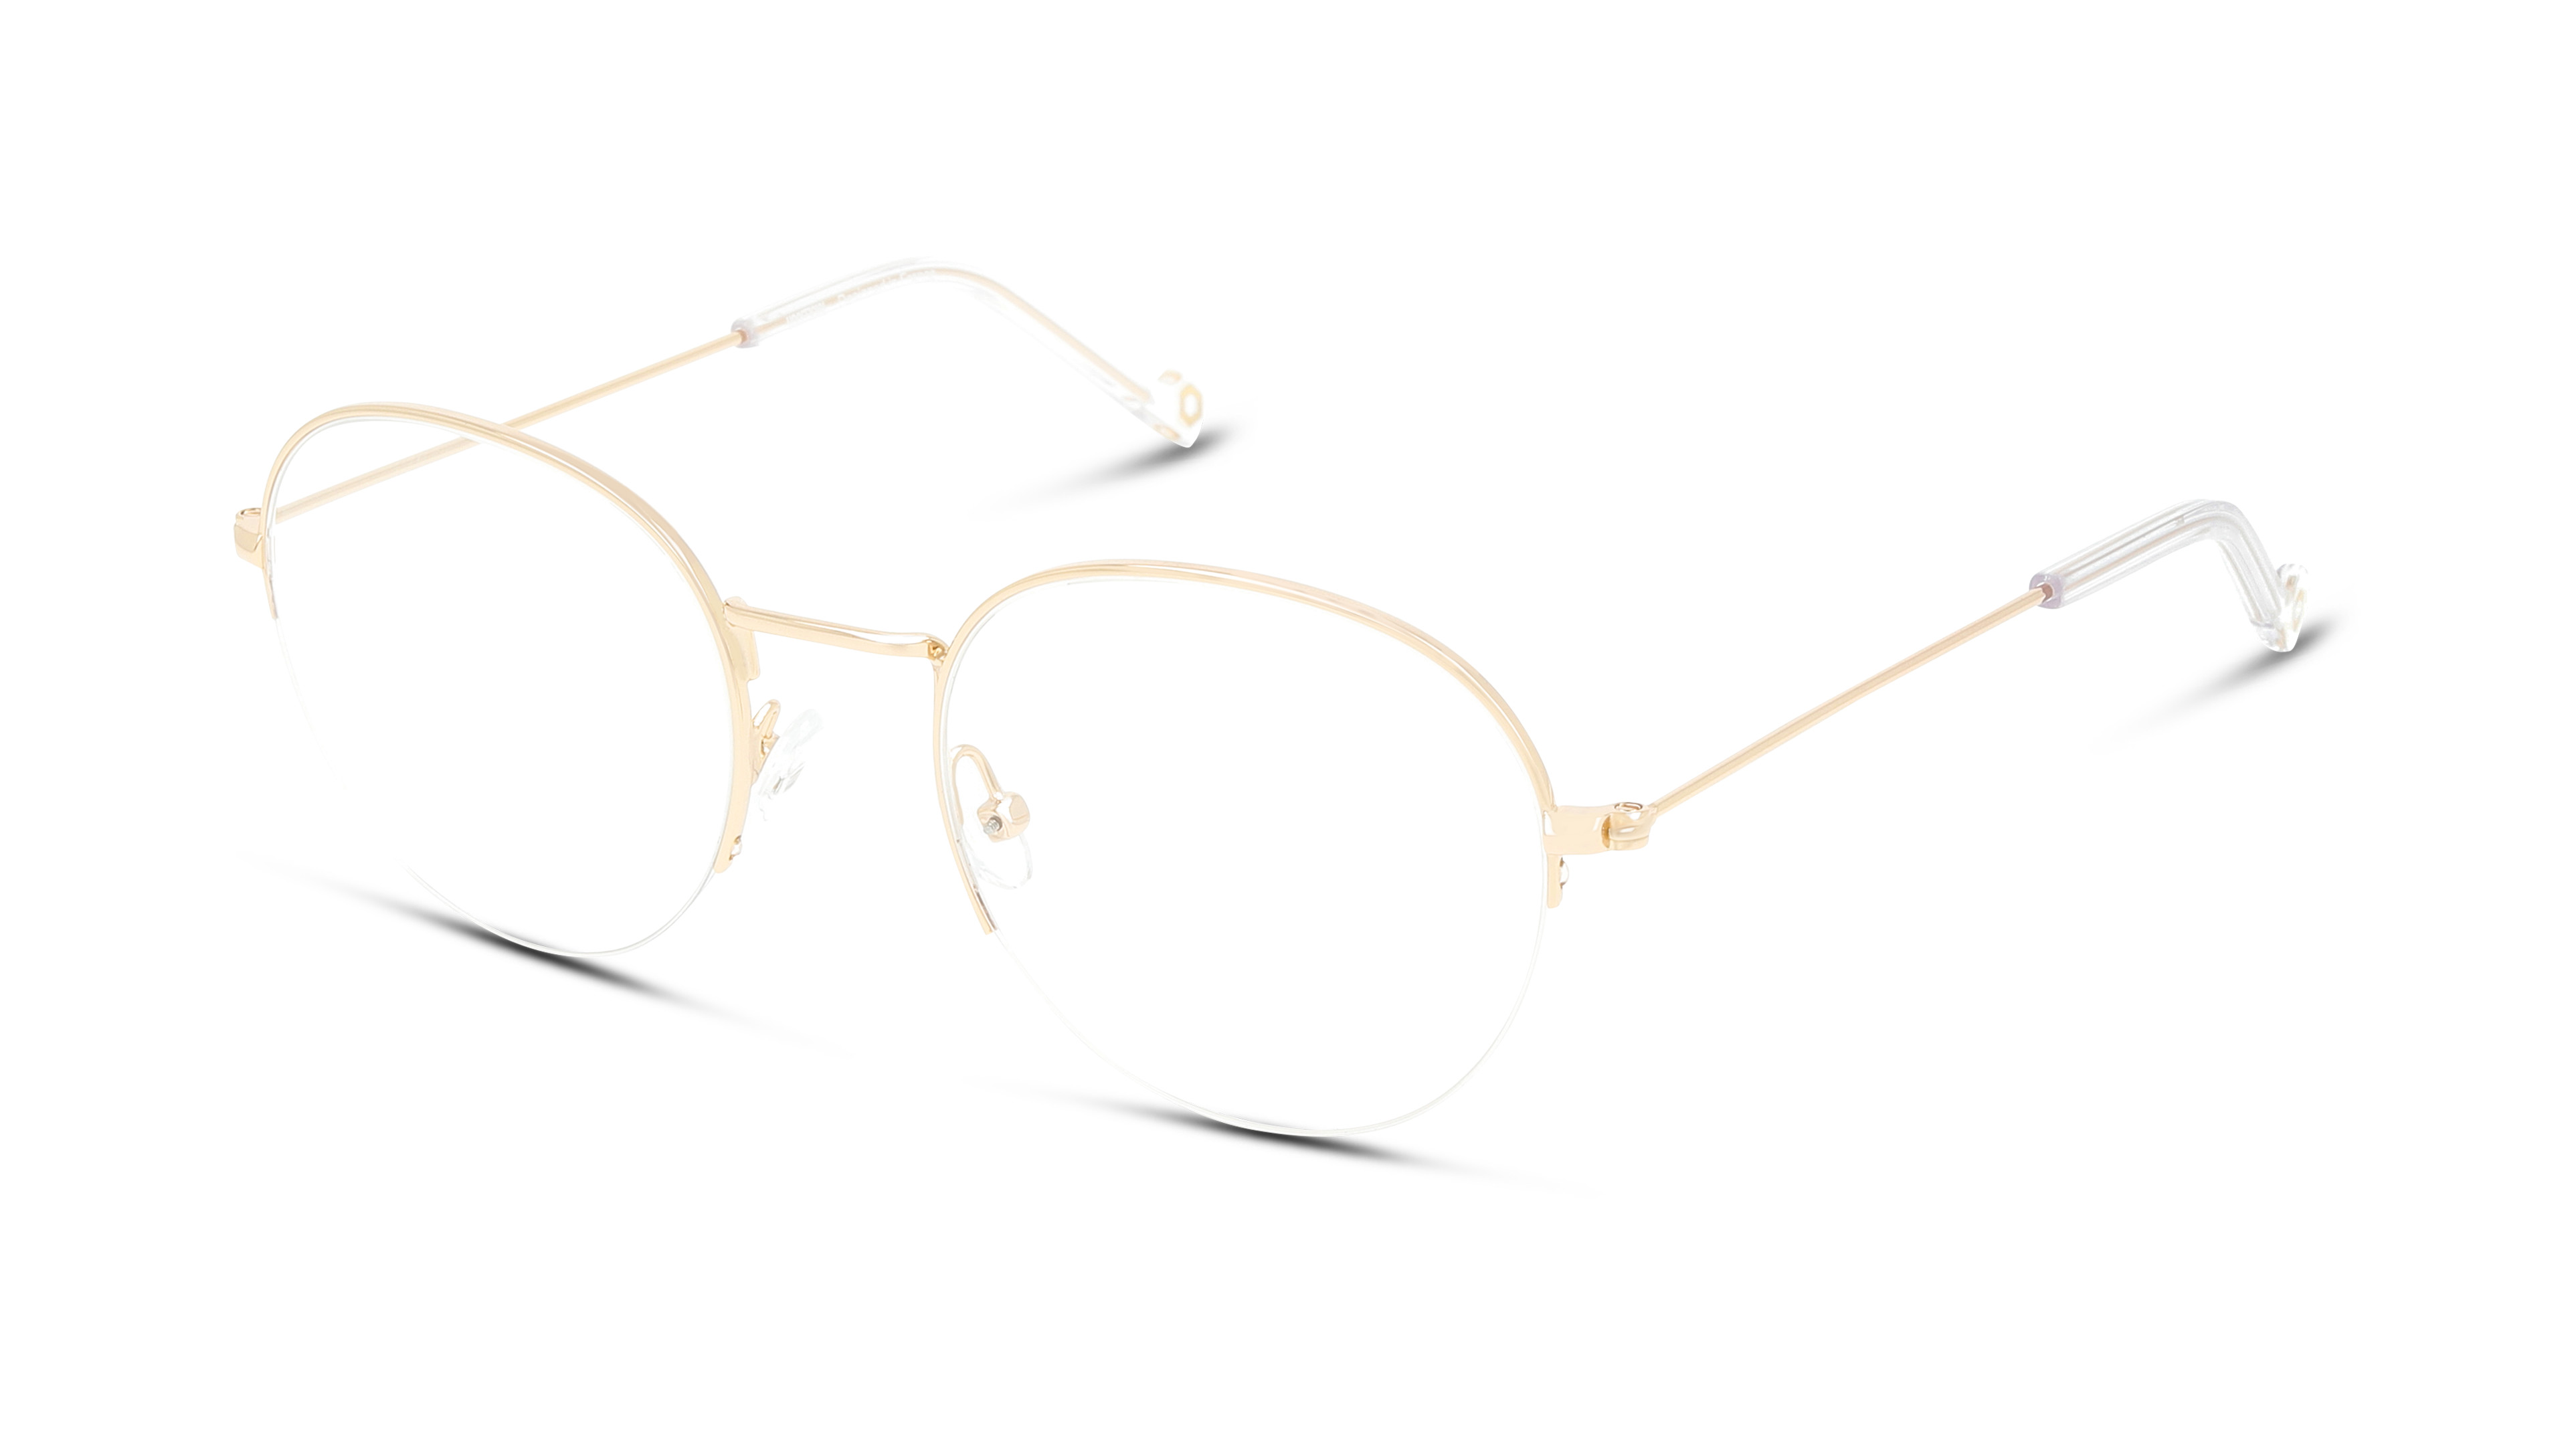 Angle_Left01 UNOFFICIAL UNOF0079 DD00 Brille Goldfarben